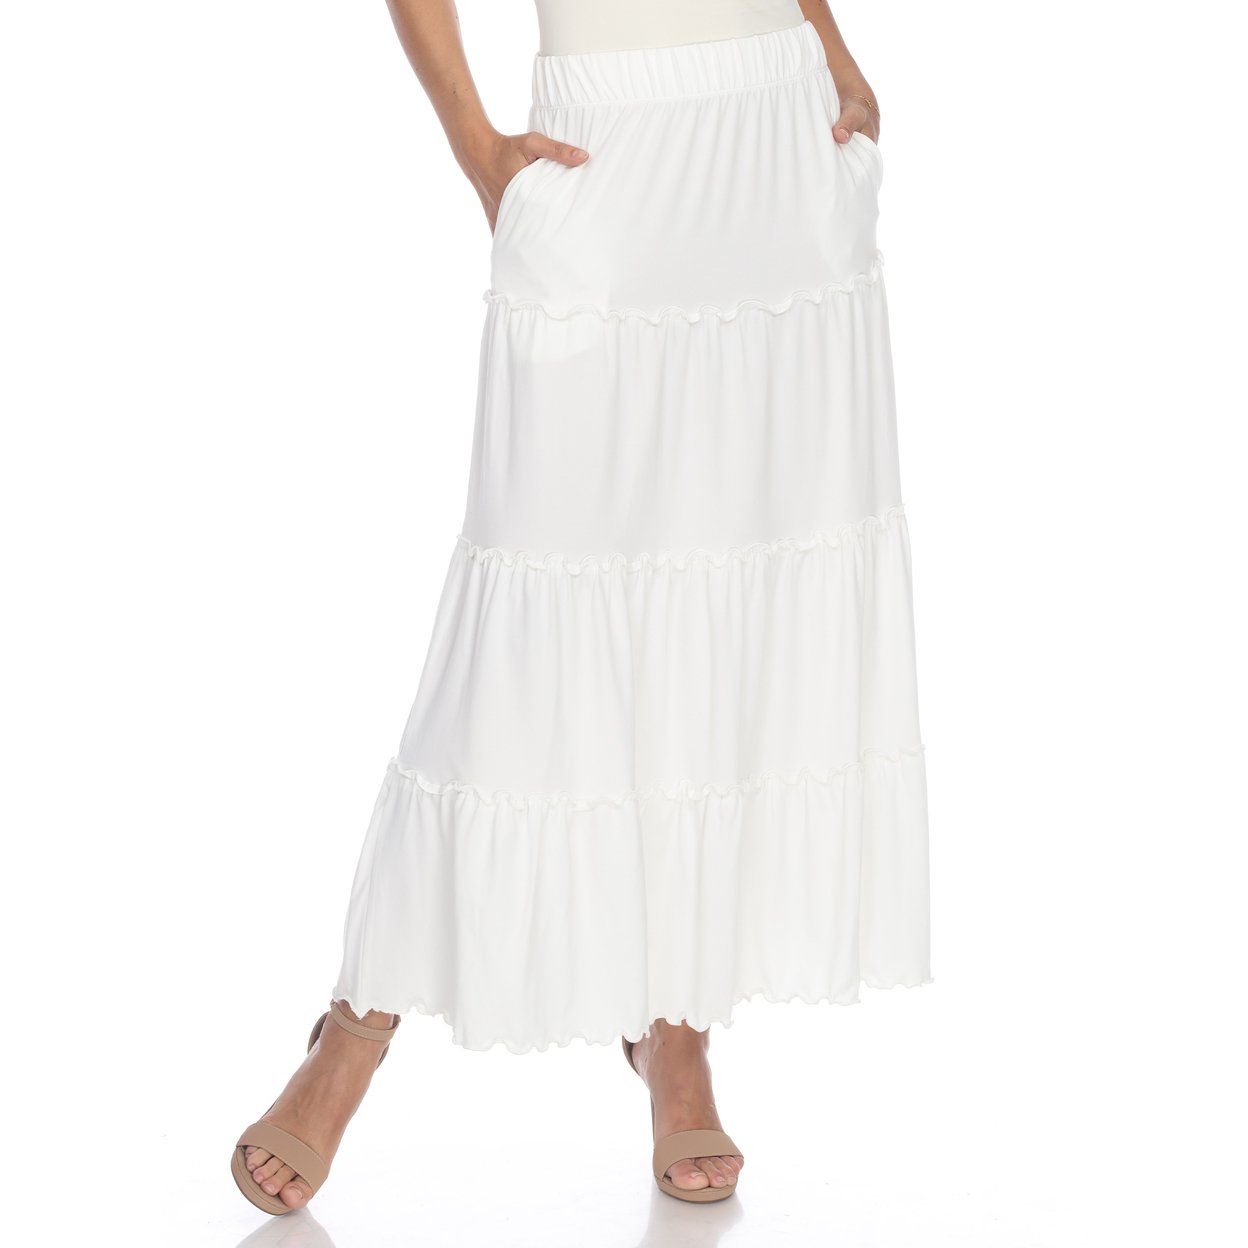 White Mark Women's Tiered Maxi Skirt With Pockets - White, Small